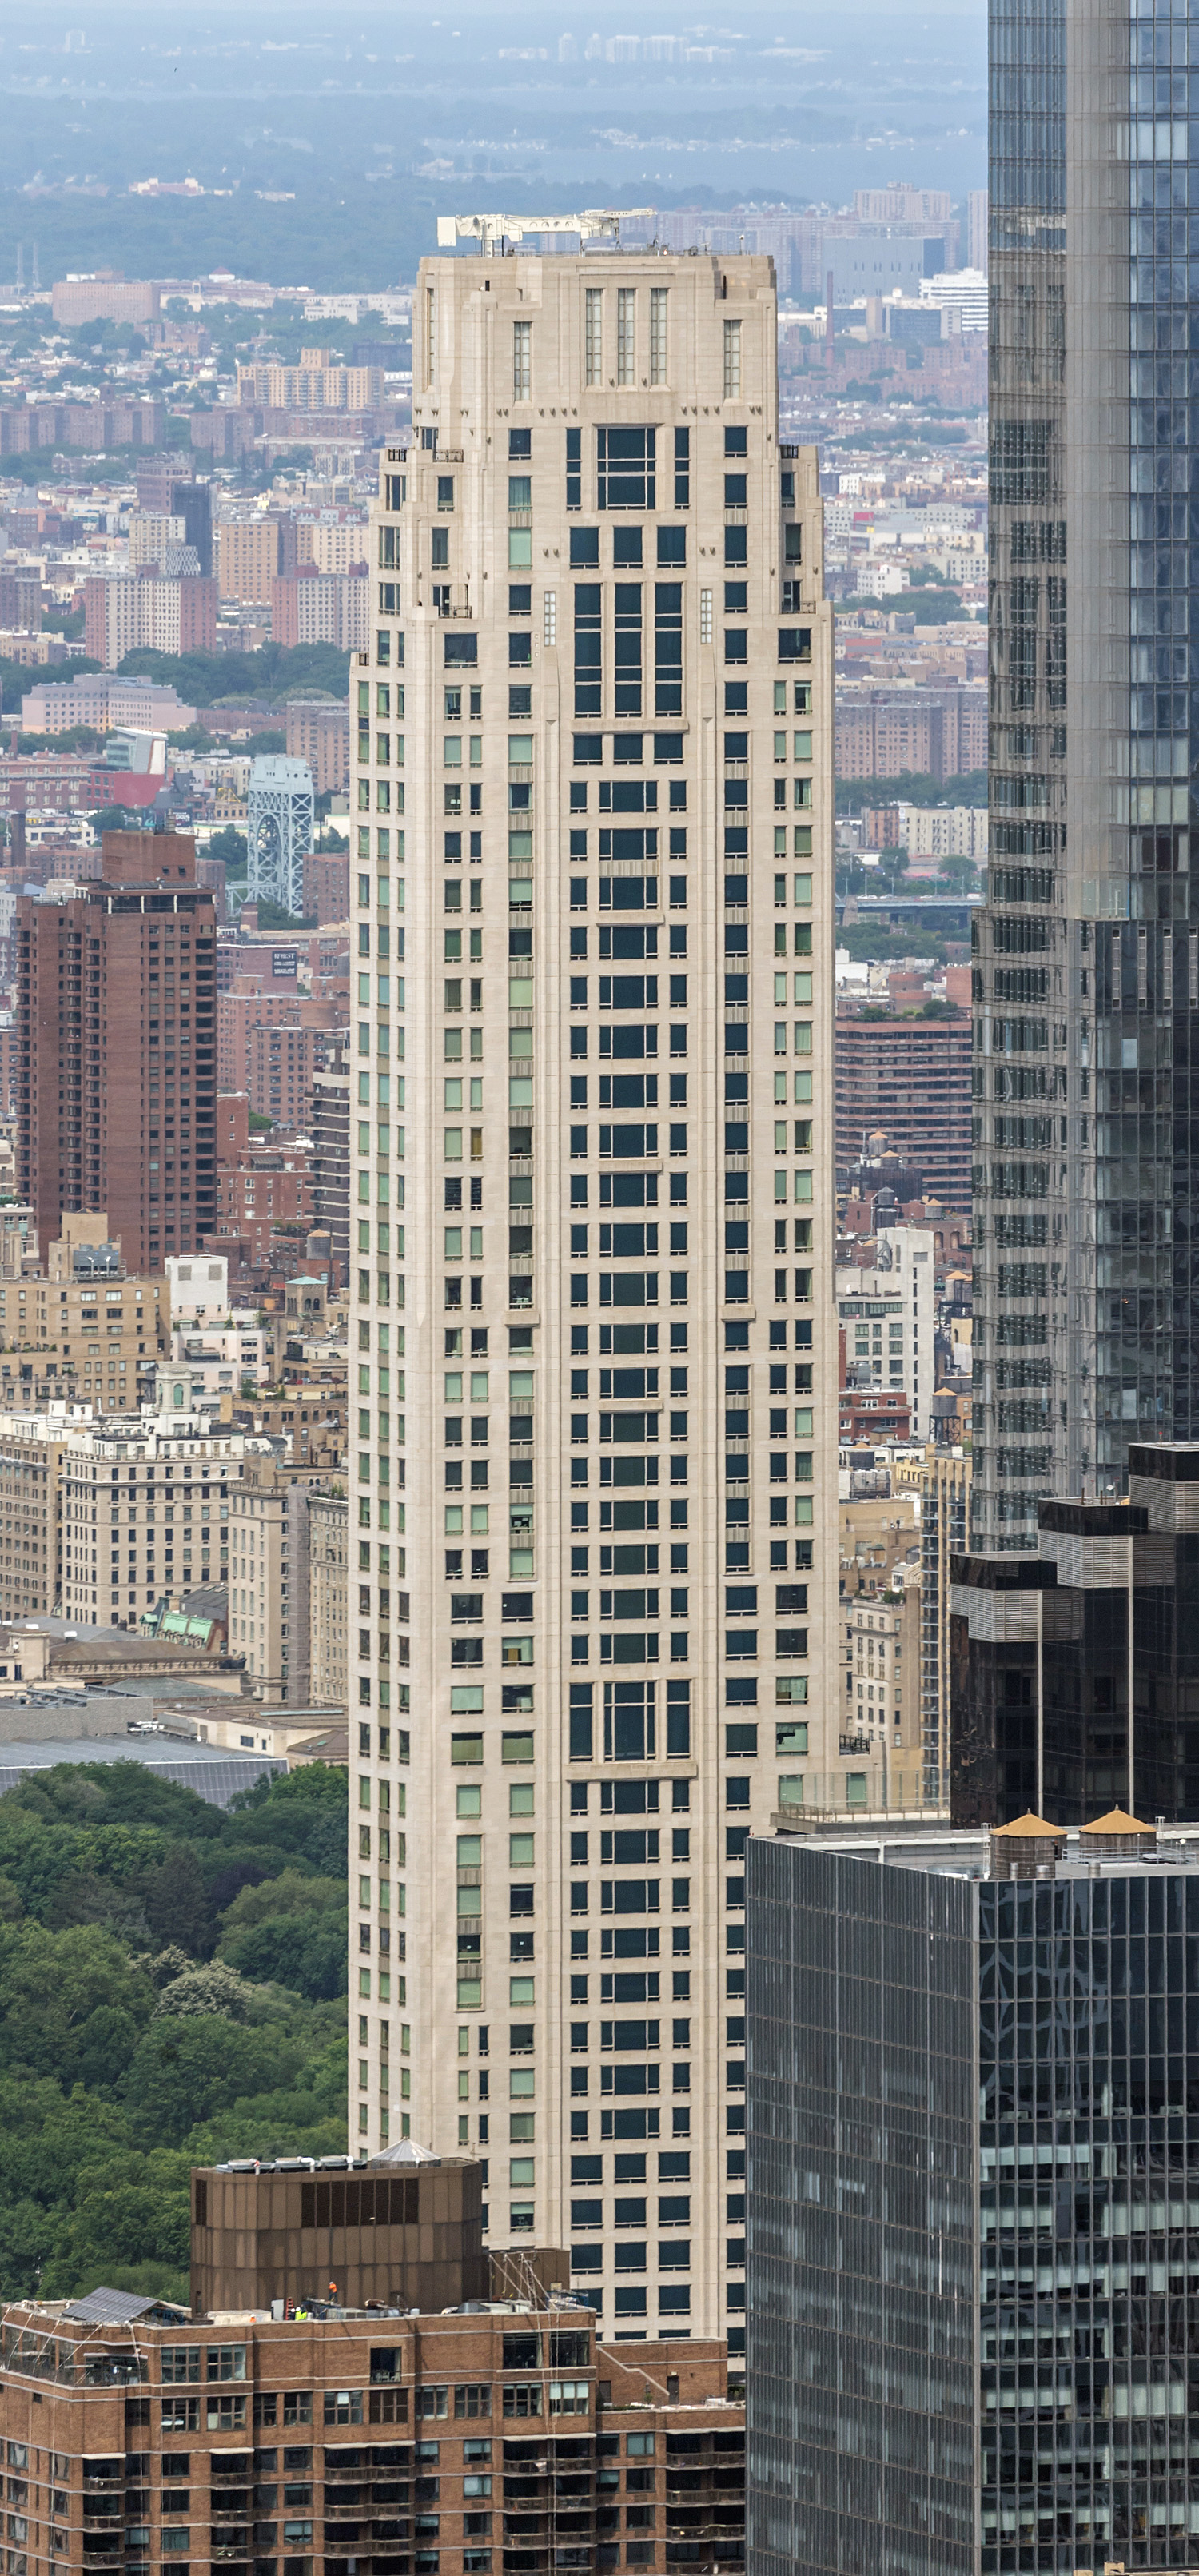 220 Central Park South, New York City - View from The Edge. © Mathias Beinling